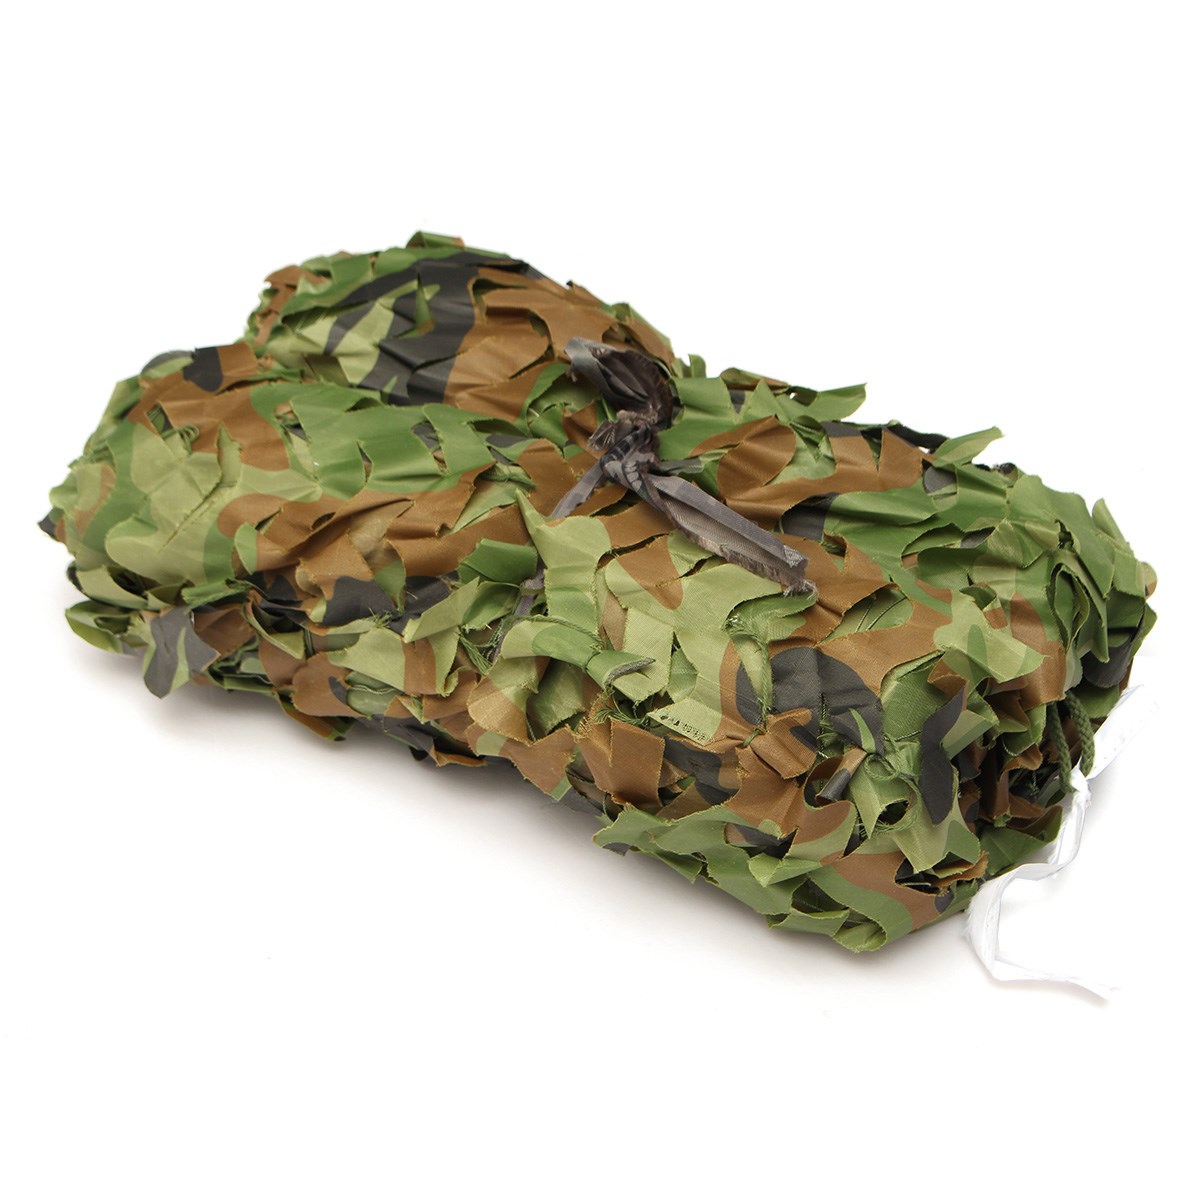 Woodland Military Camouflage Netting Camo Army Hide Camping Hunting Cover Net 